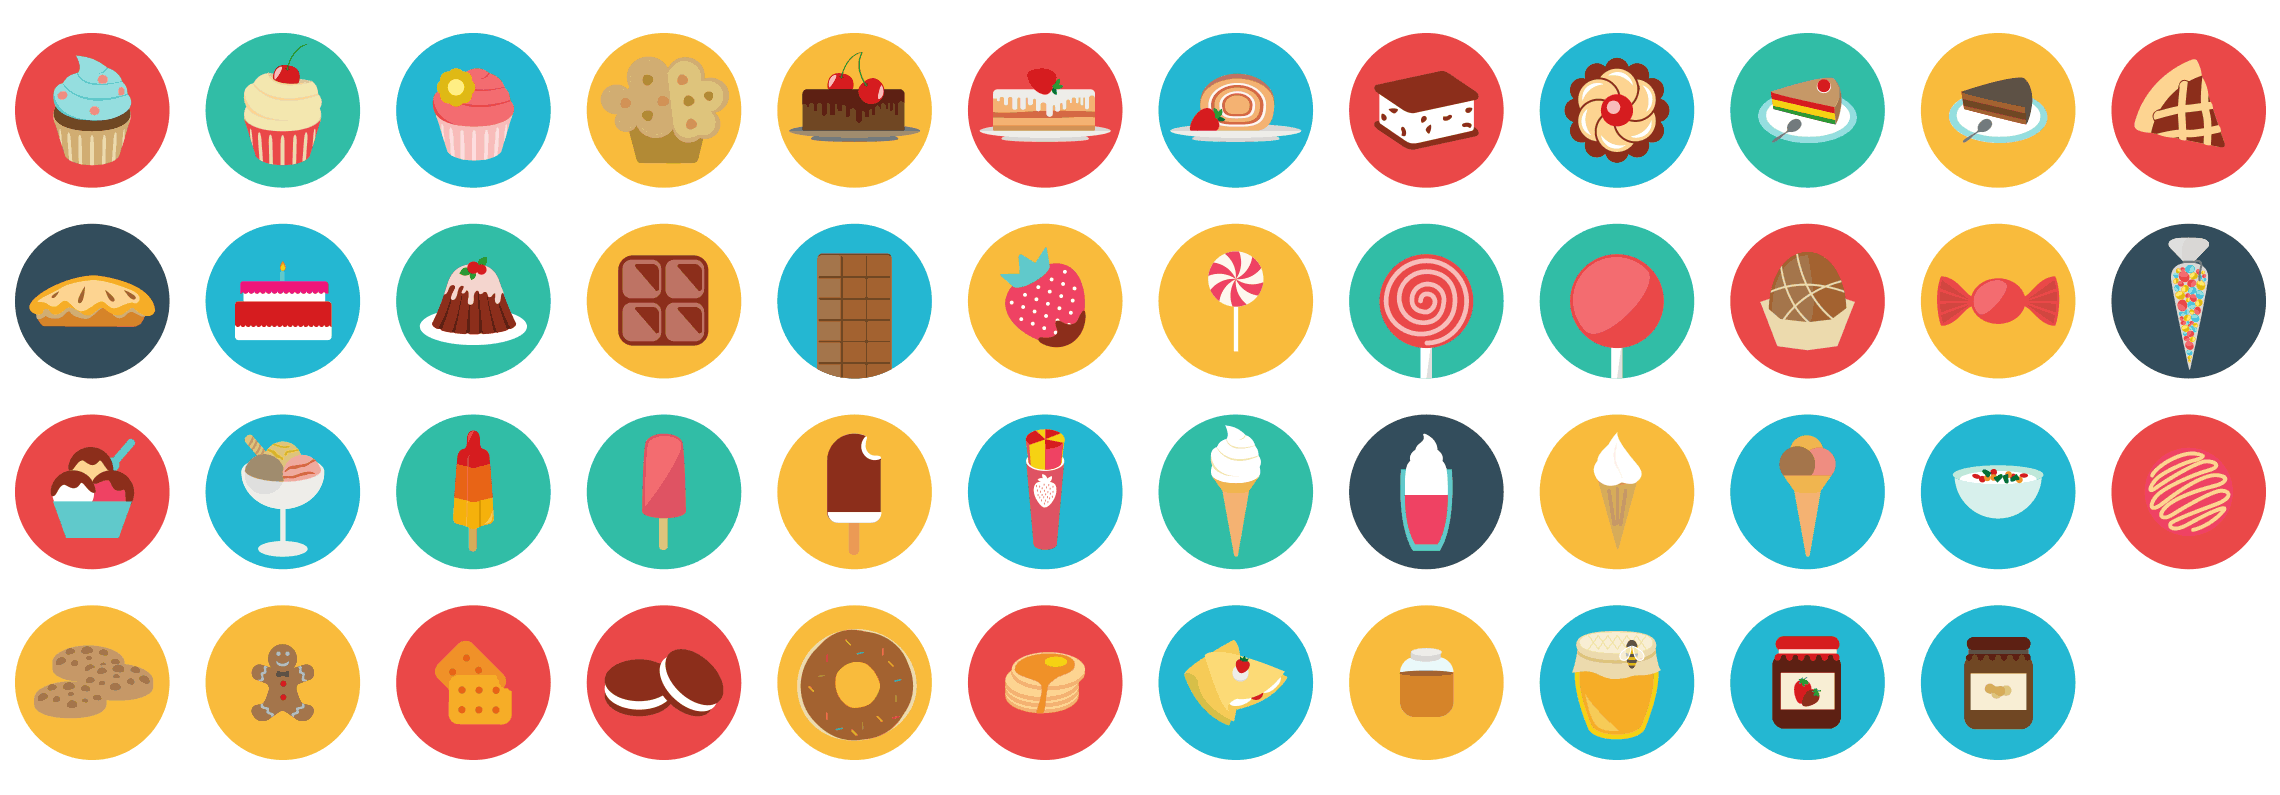 sweets-flat-icons-vol-1-preview